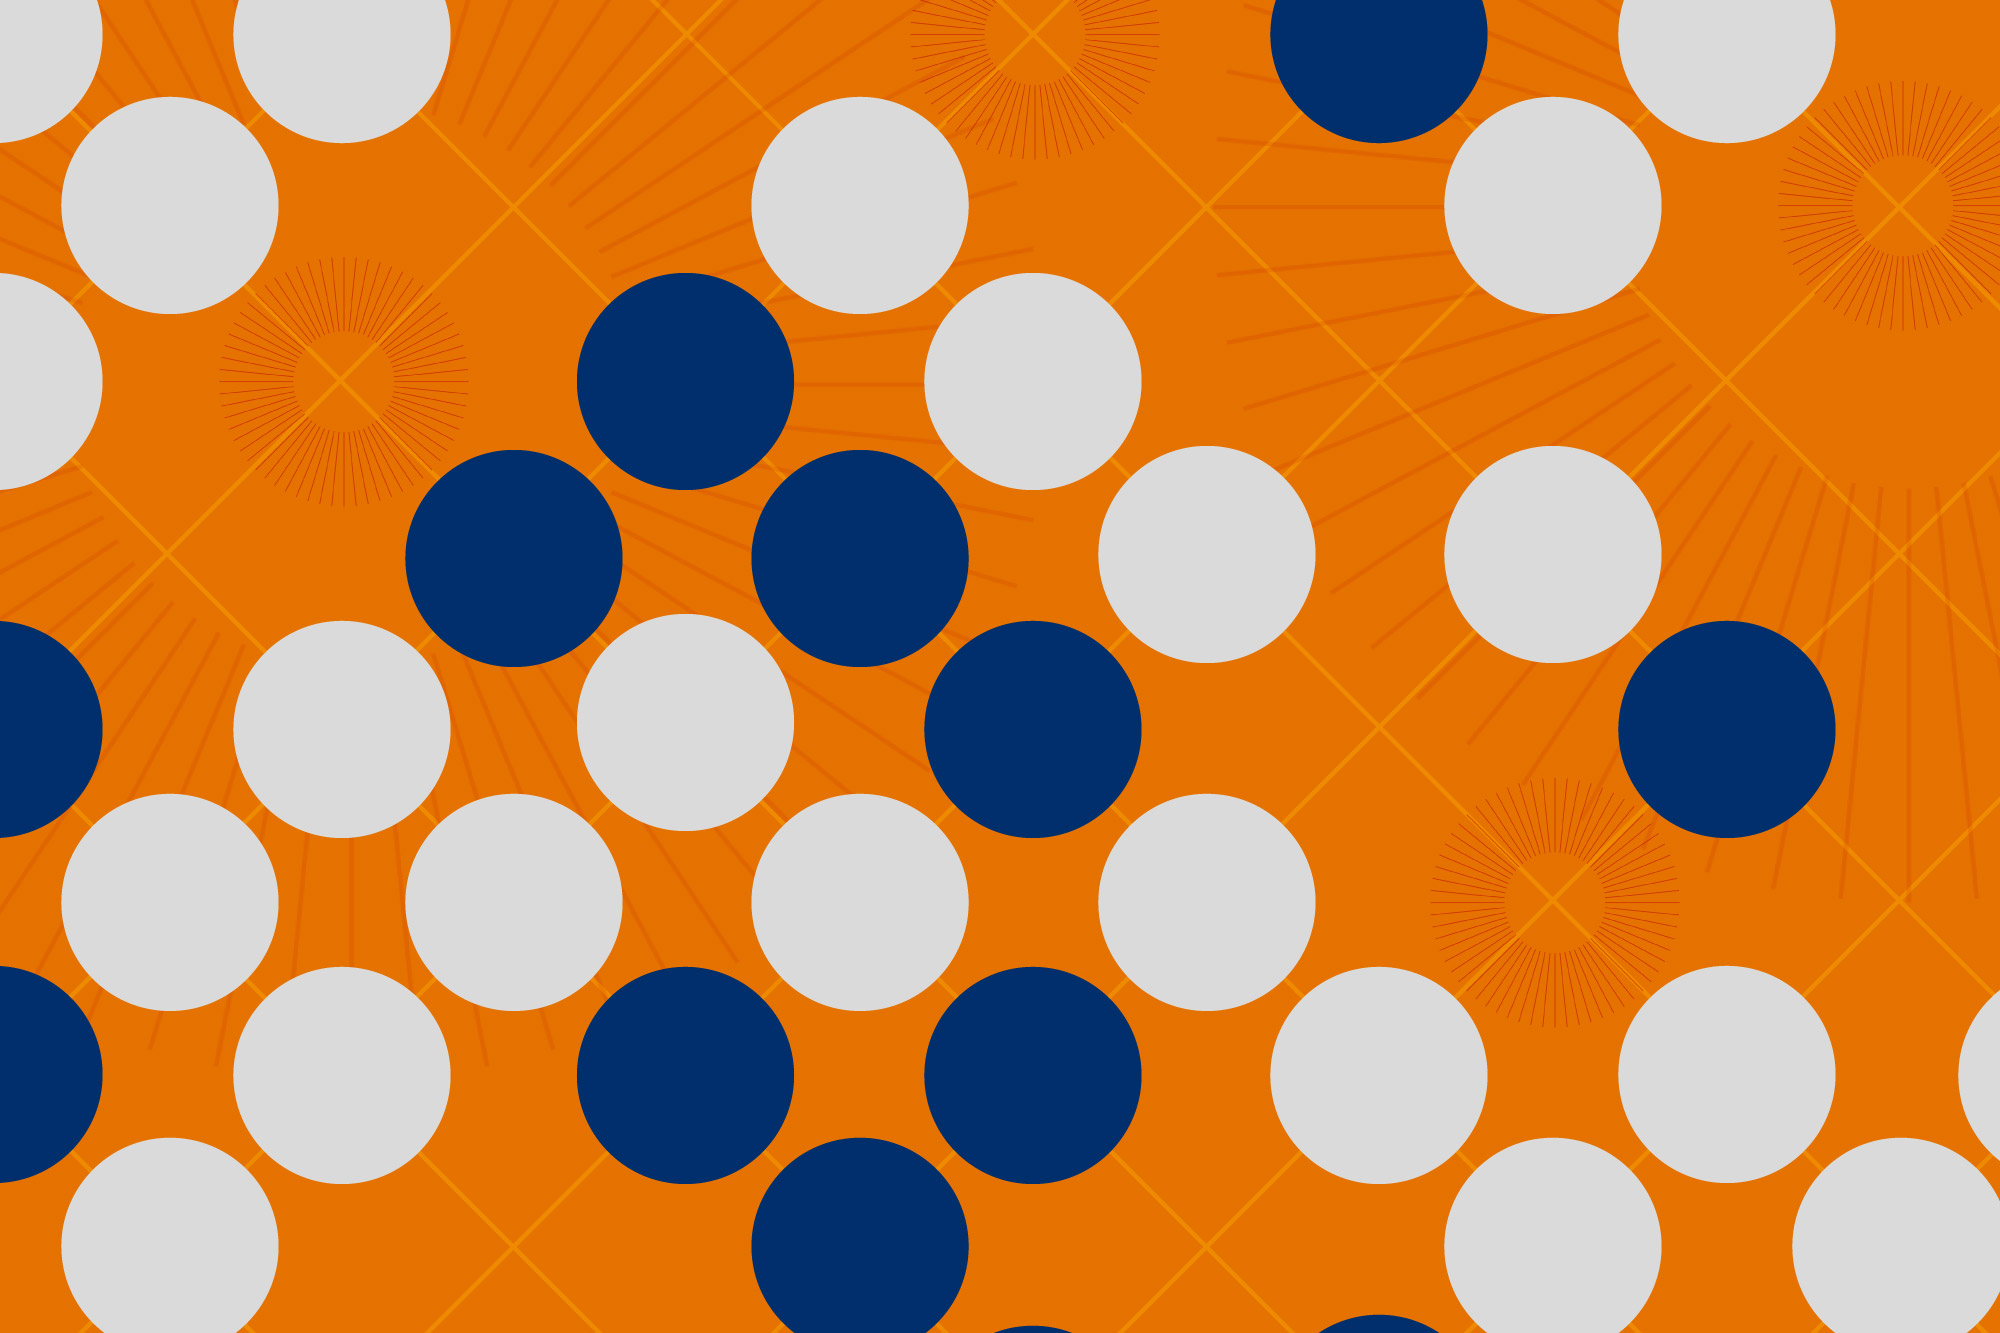 White and Blue dots on an orange background